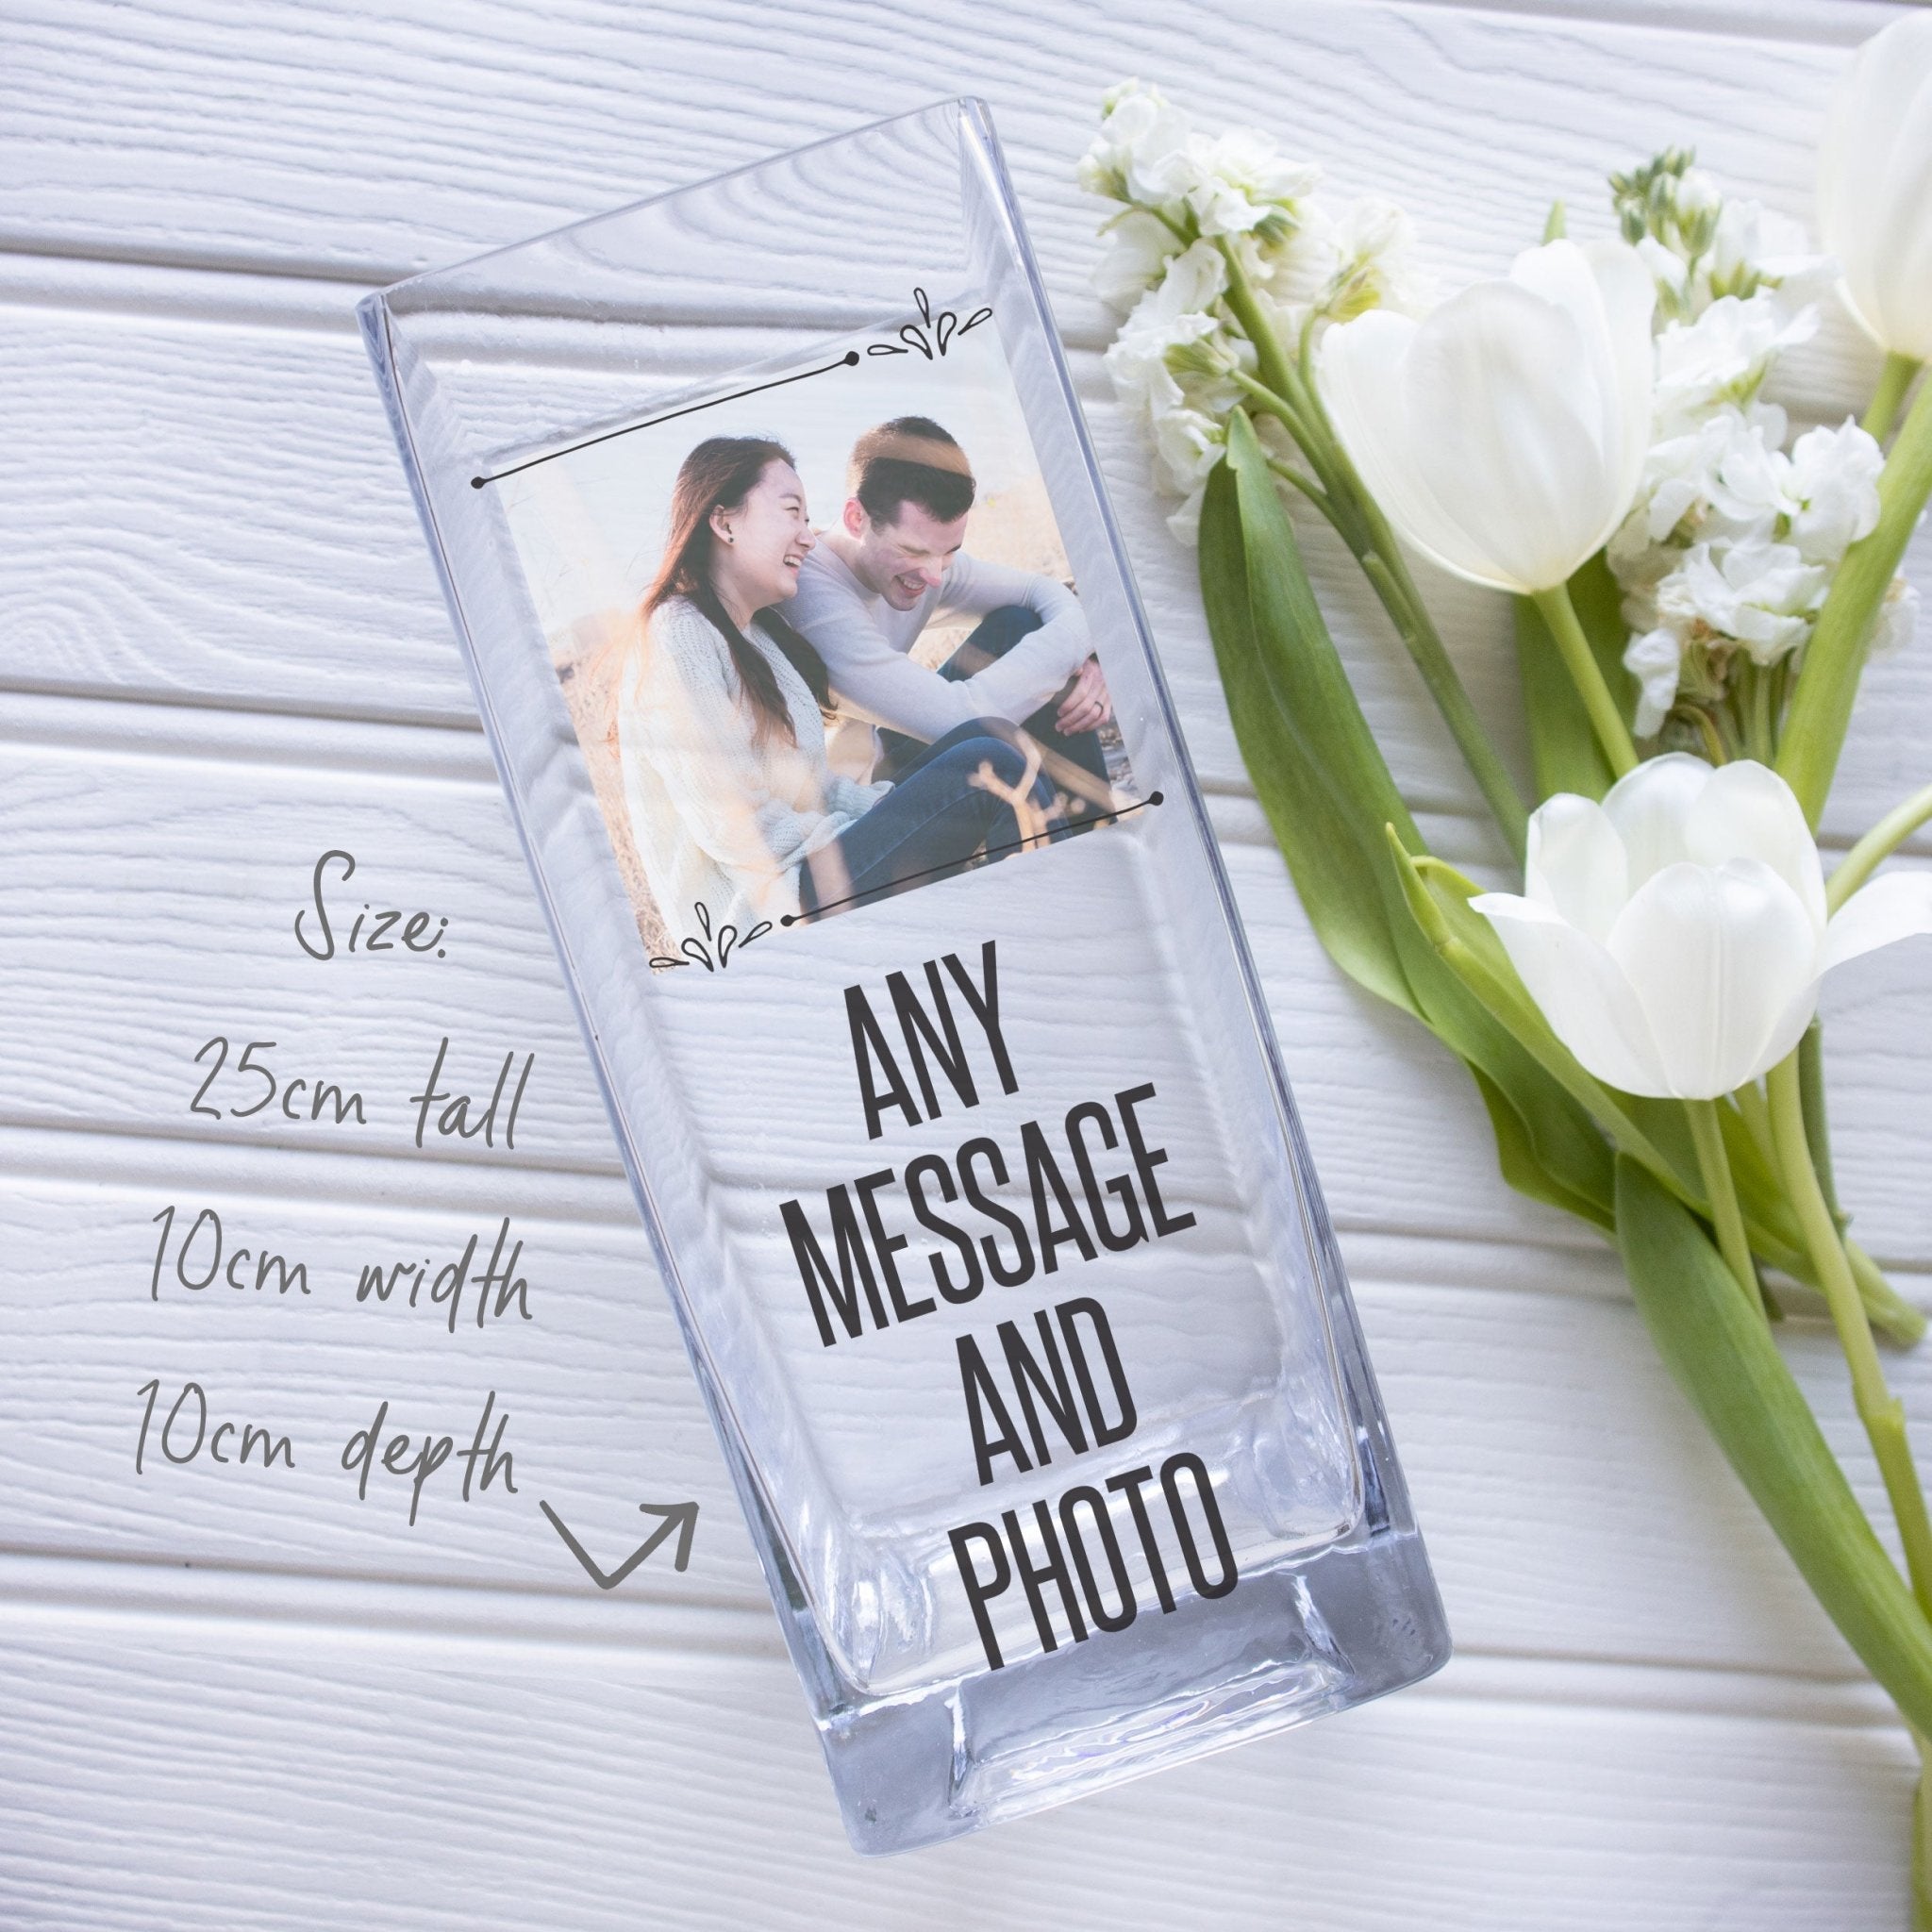 Custom Message Personalized Photo Glass Vase | Quotation Gift Ideas | Personalised Keepsake | Flower Stand with Picture Home Decor Present Vase - Unique Prints